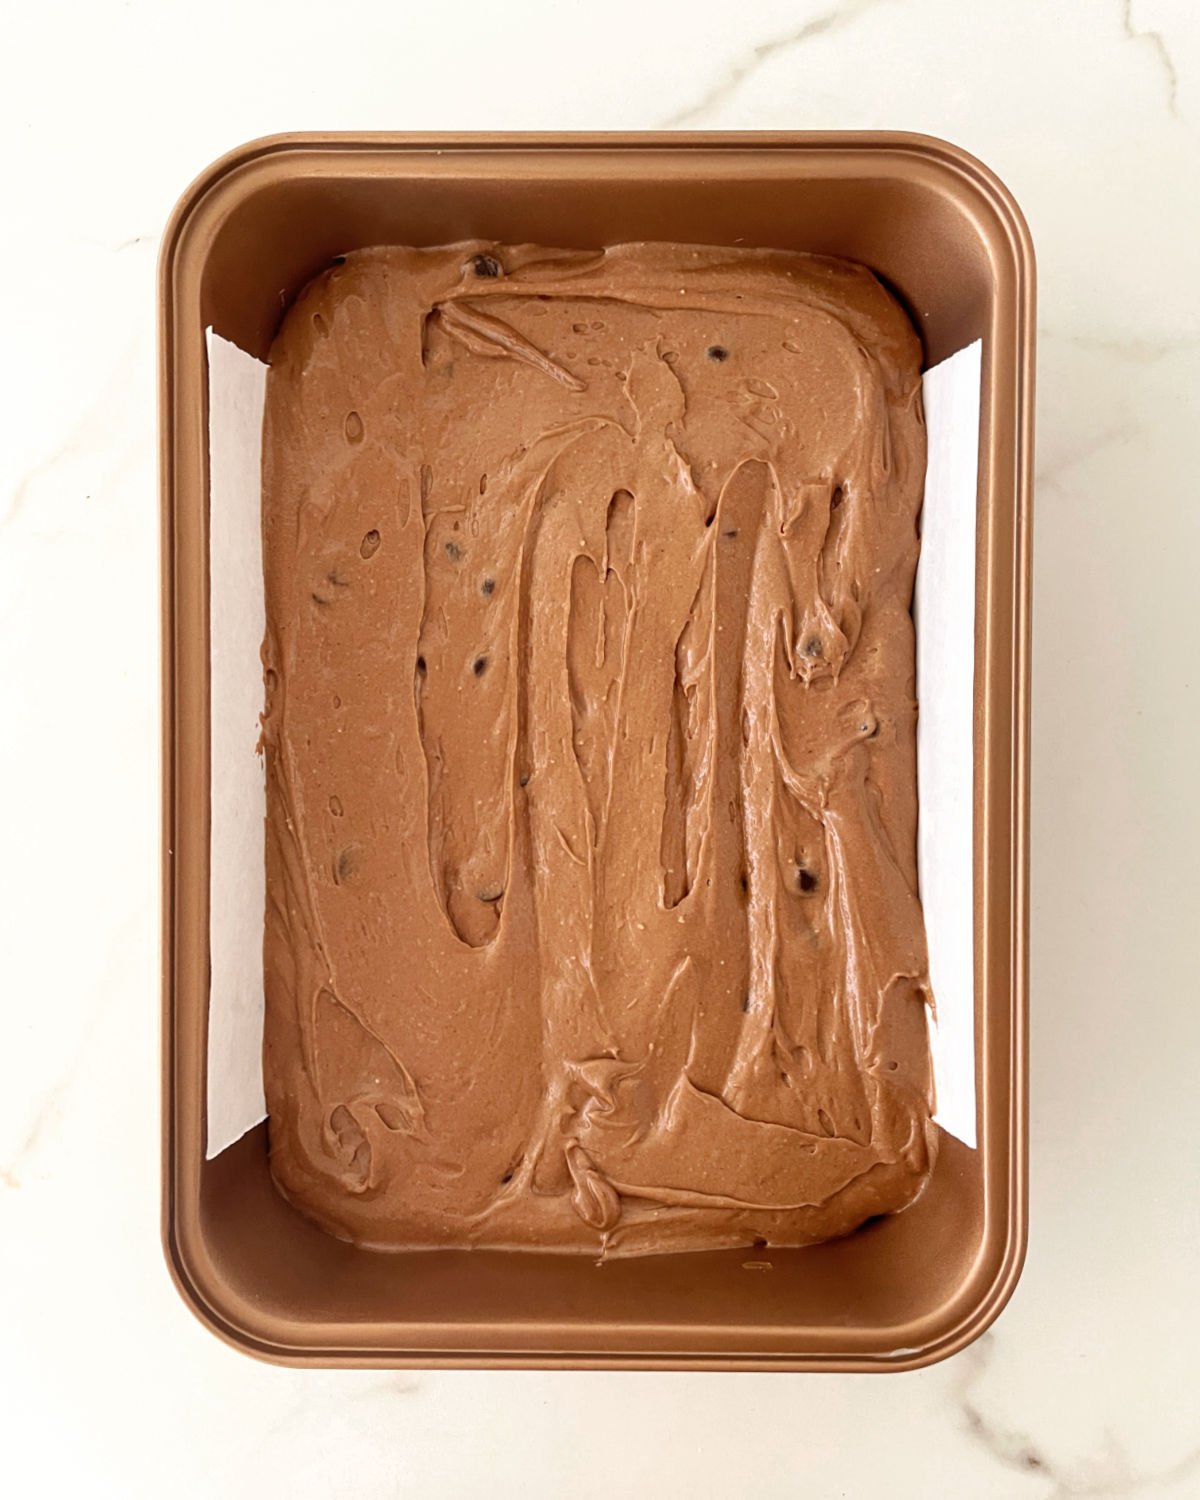 Top view of chocolate cake batter in a rectangular copper colored pan on a white marble surface.